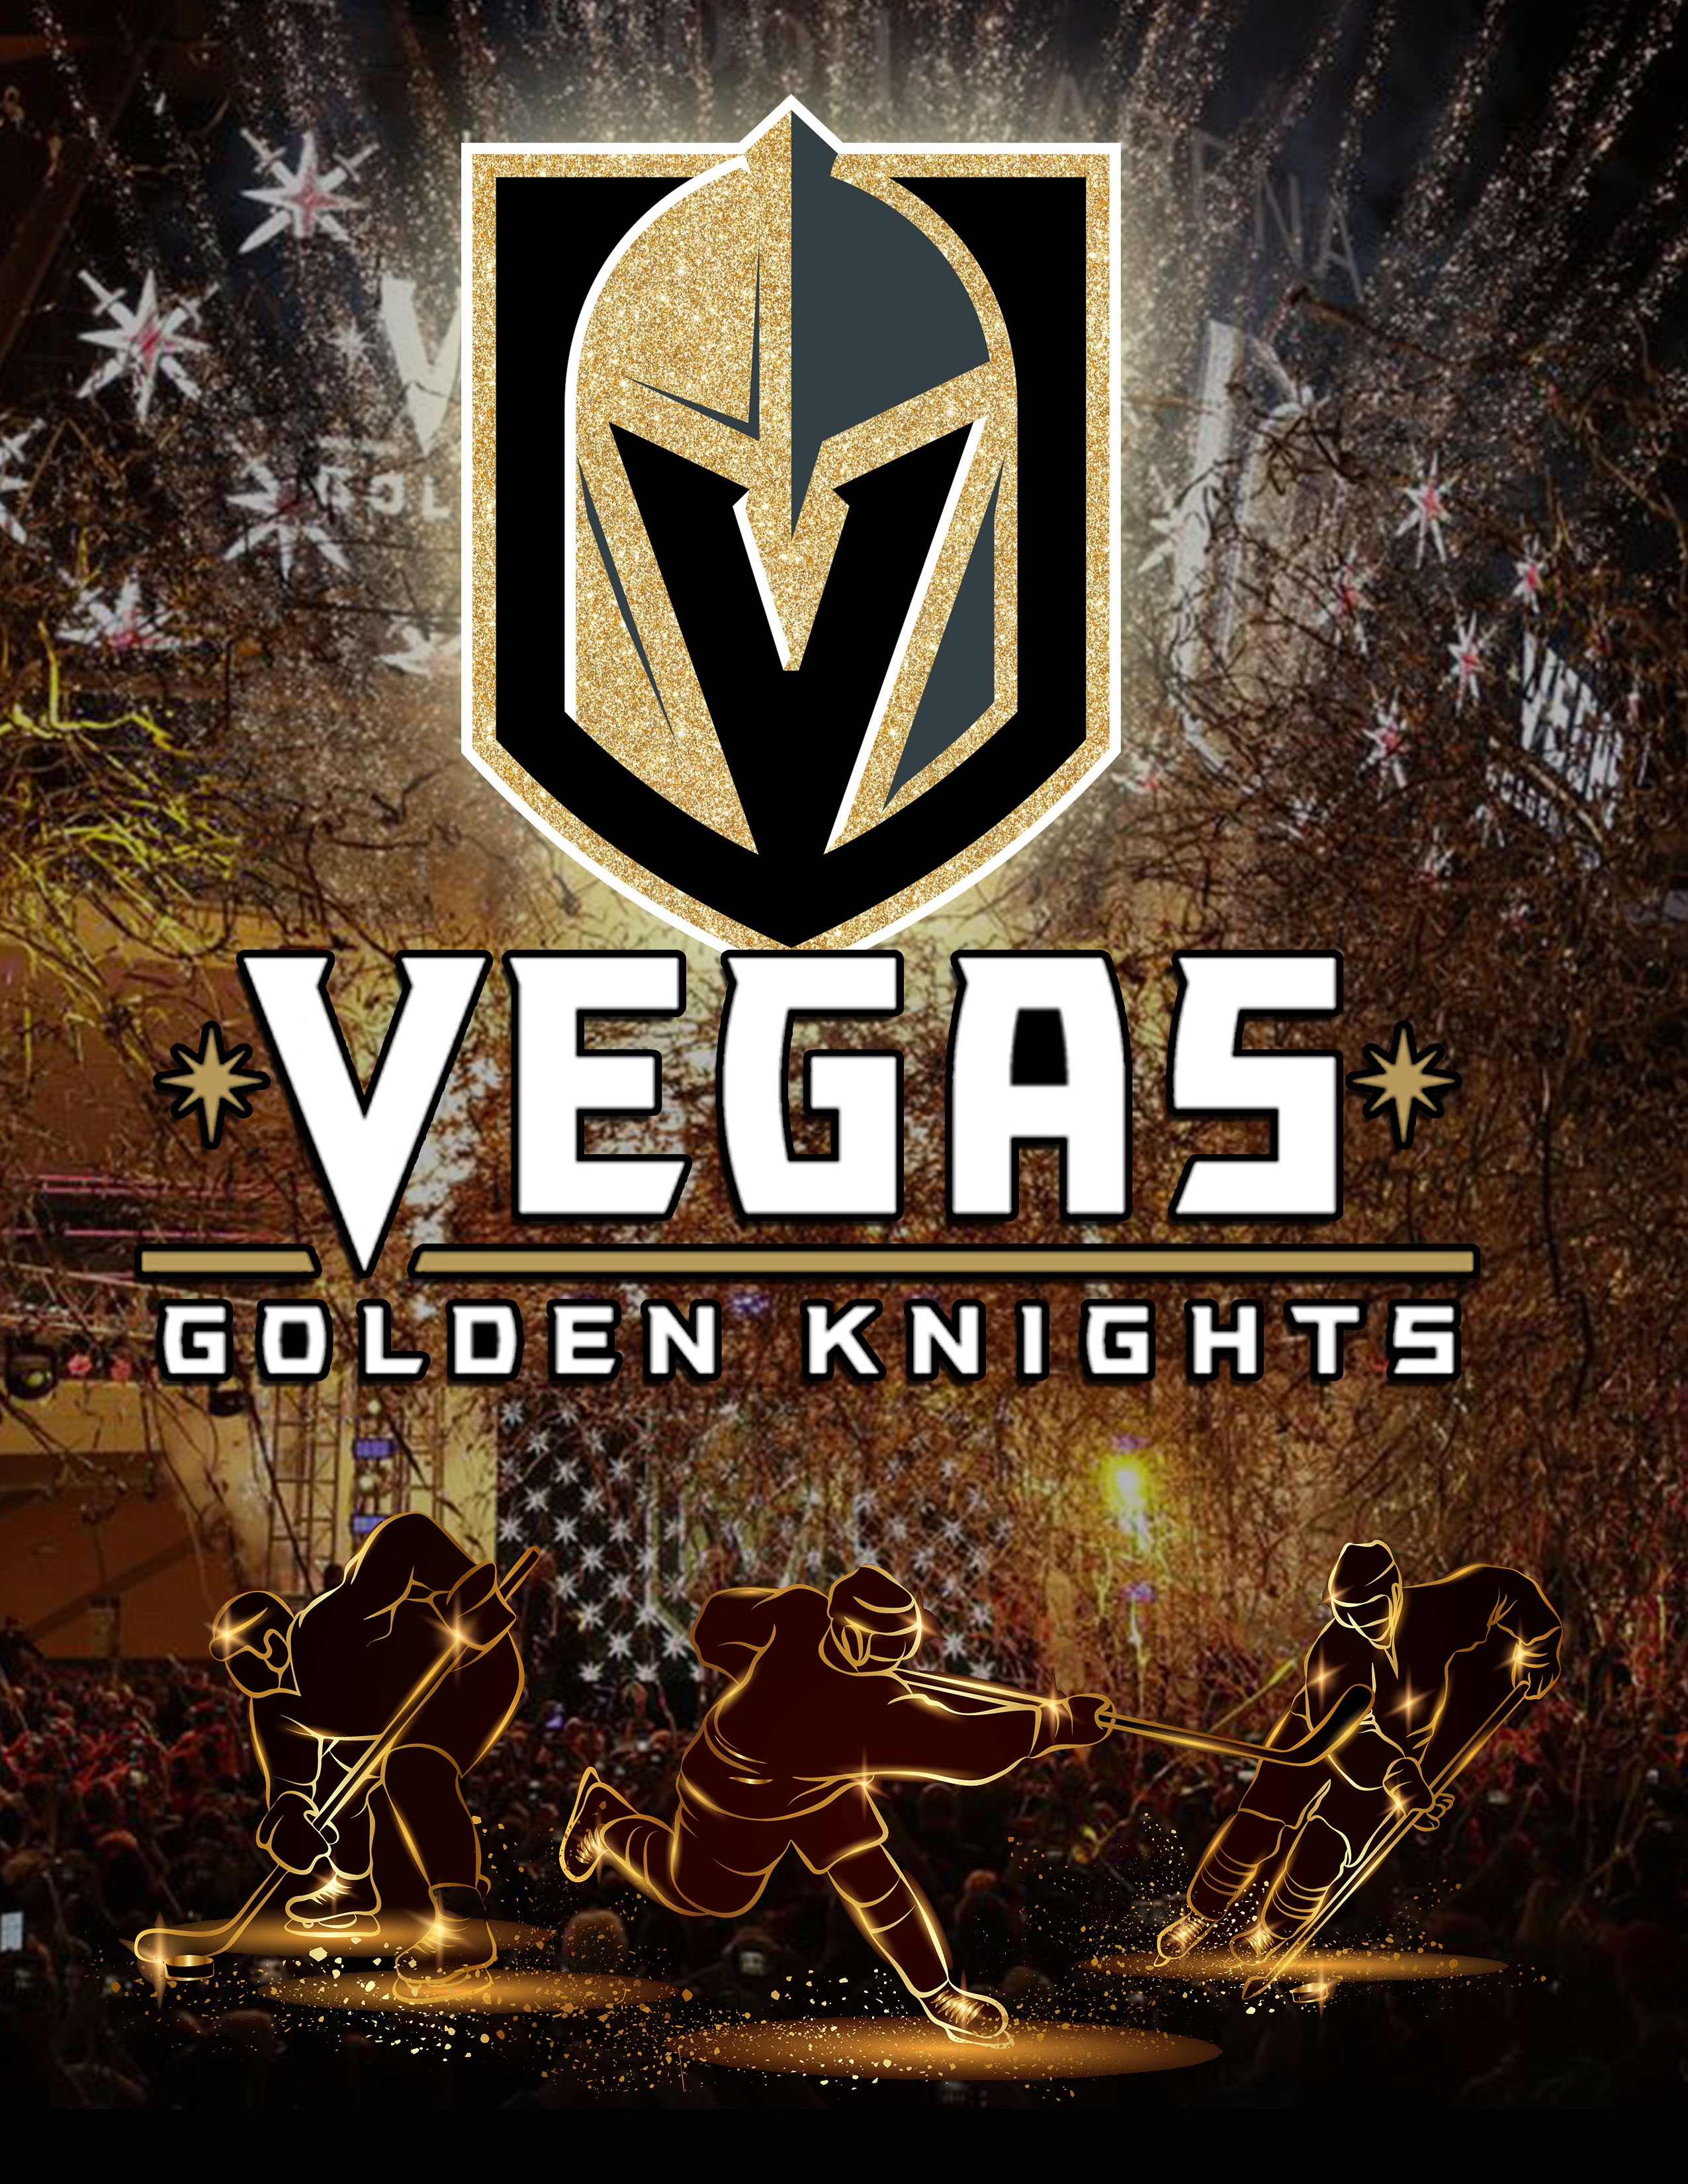 Golden Knights and Oct. 1 in Las Vegas Will Always Be Connected